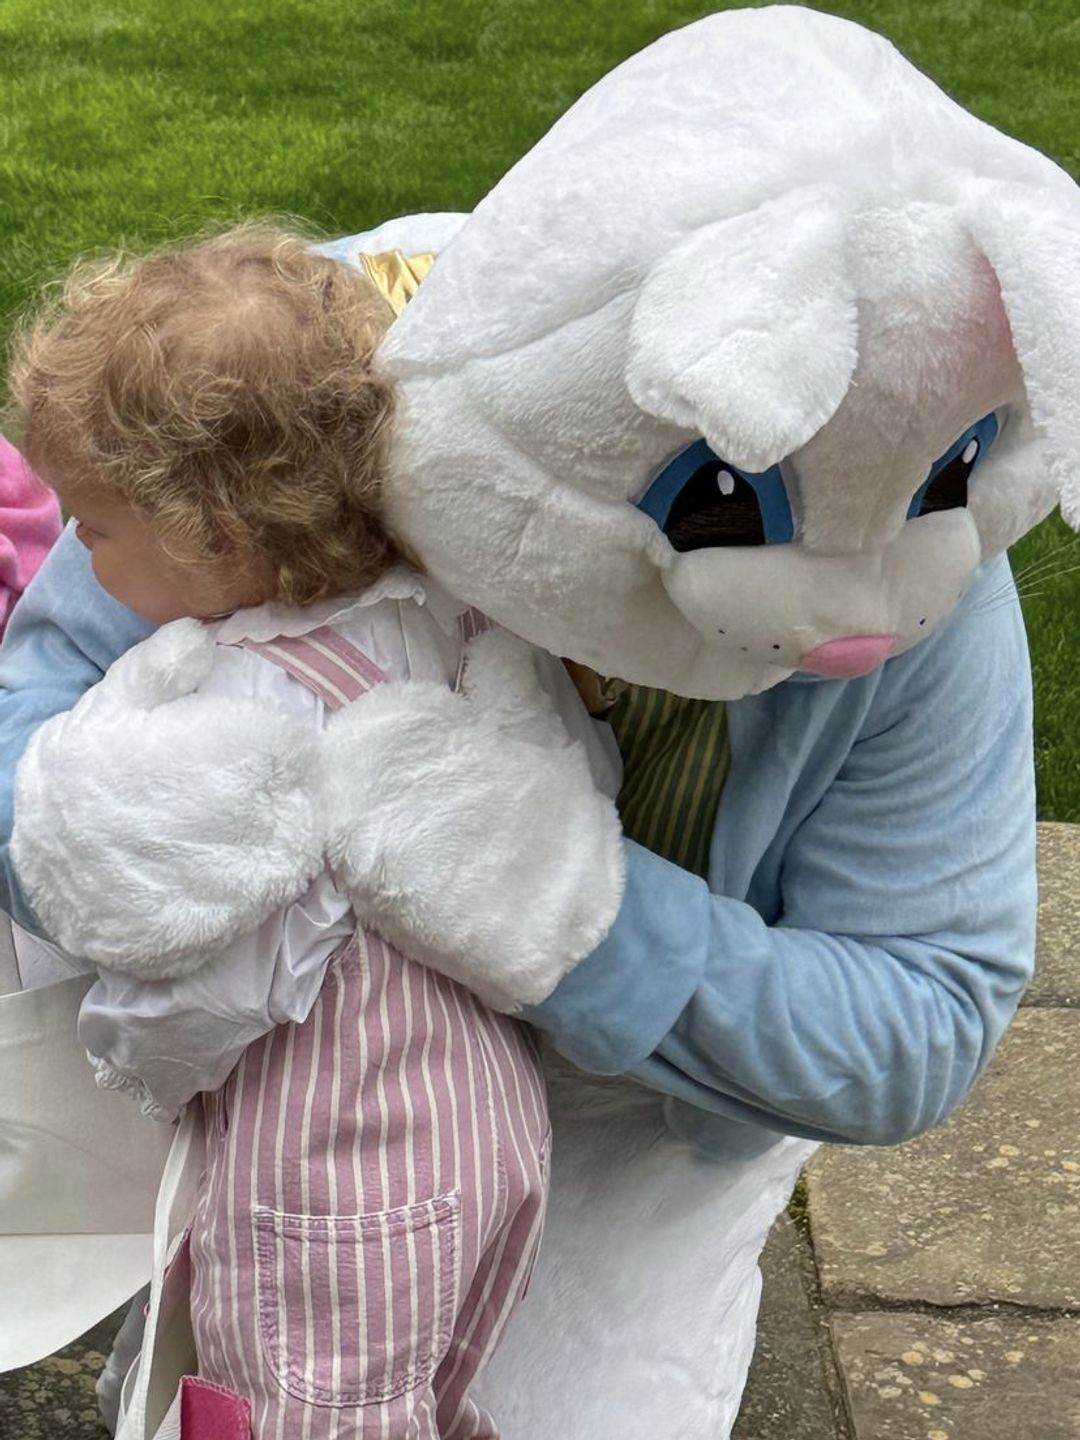 Rosie Huntington-Whiteley's daughter hugging the Easter bunny